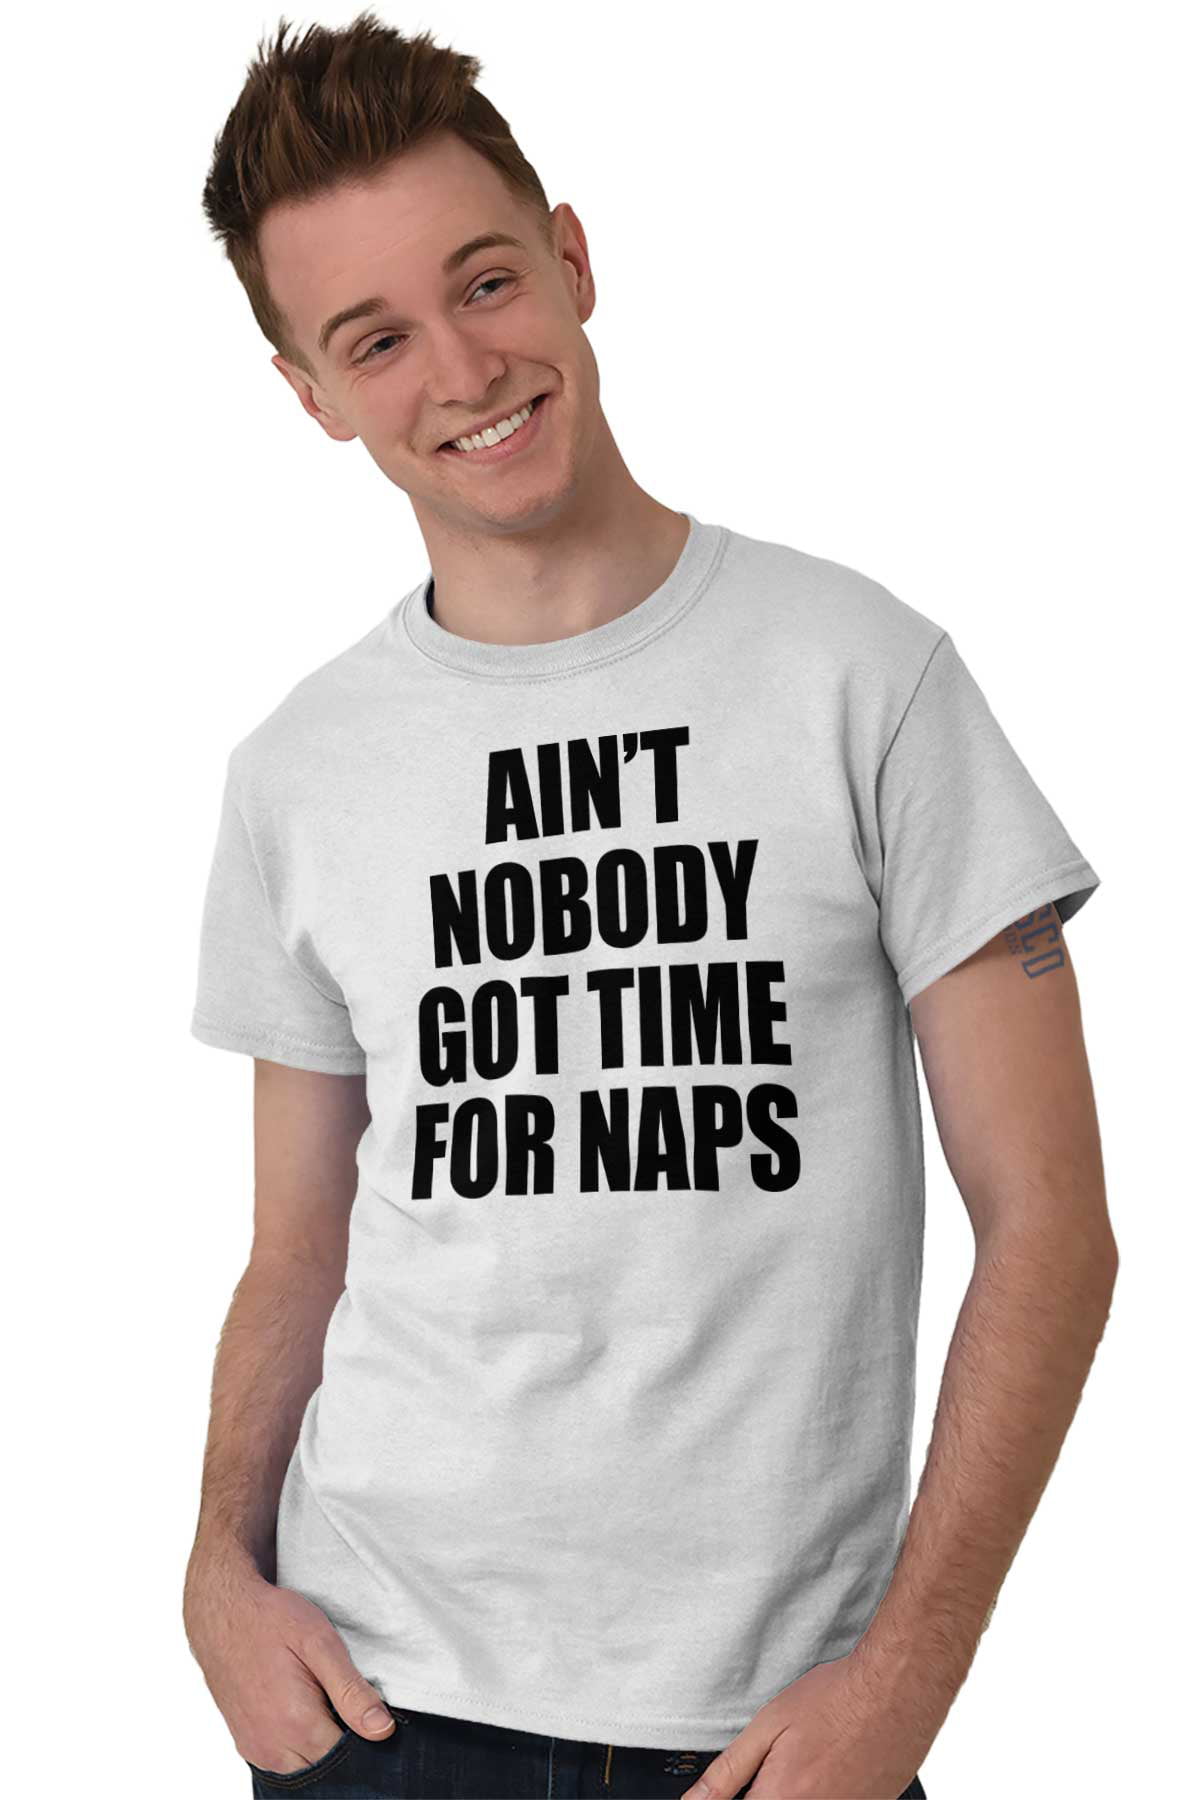 Family Sets Toddler T-shirt Personalized T-shirt Ain't Nobody got Time for Naps girls T-shirt Funny Shirt